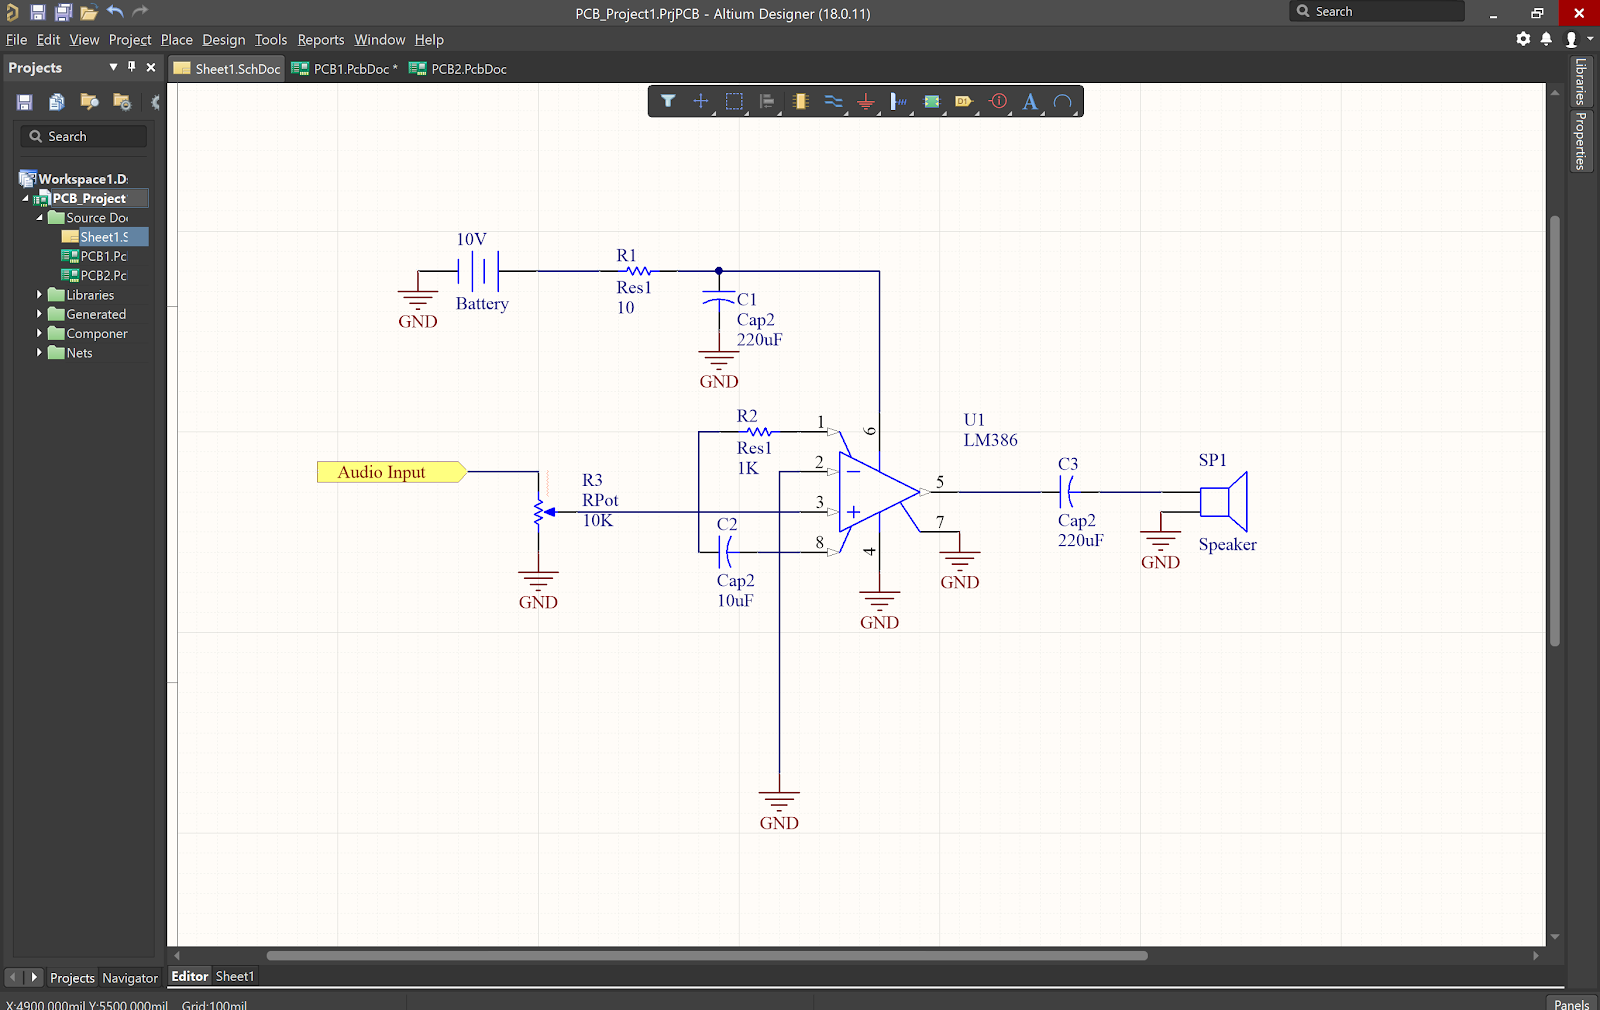 The ending amp schematic we will be working to make a PCB from